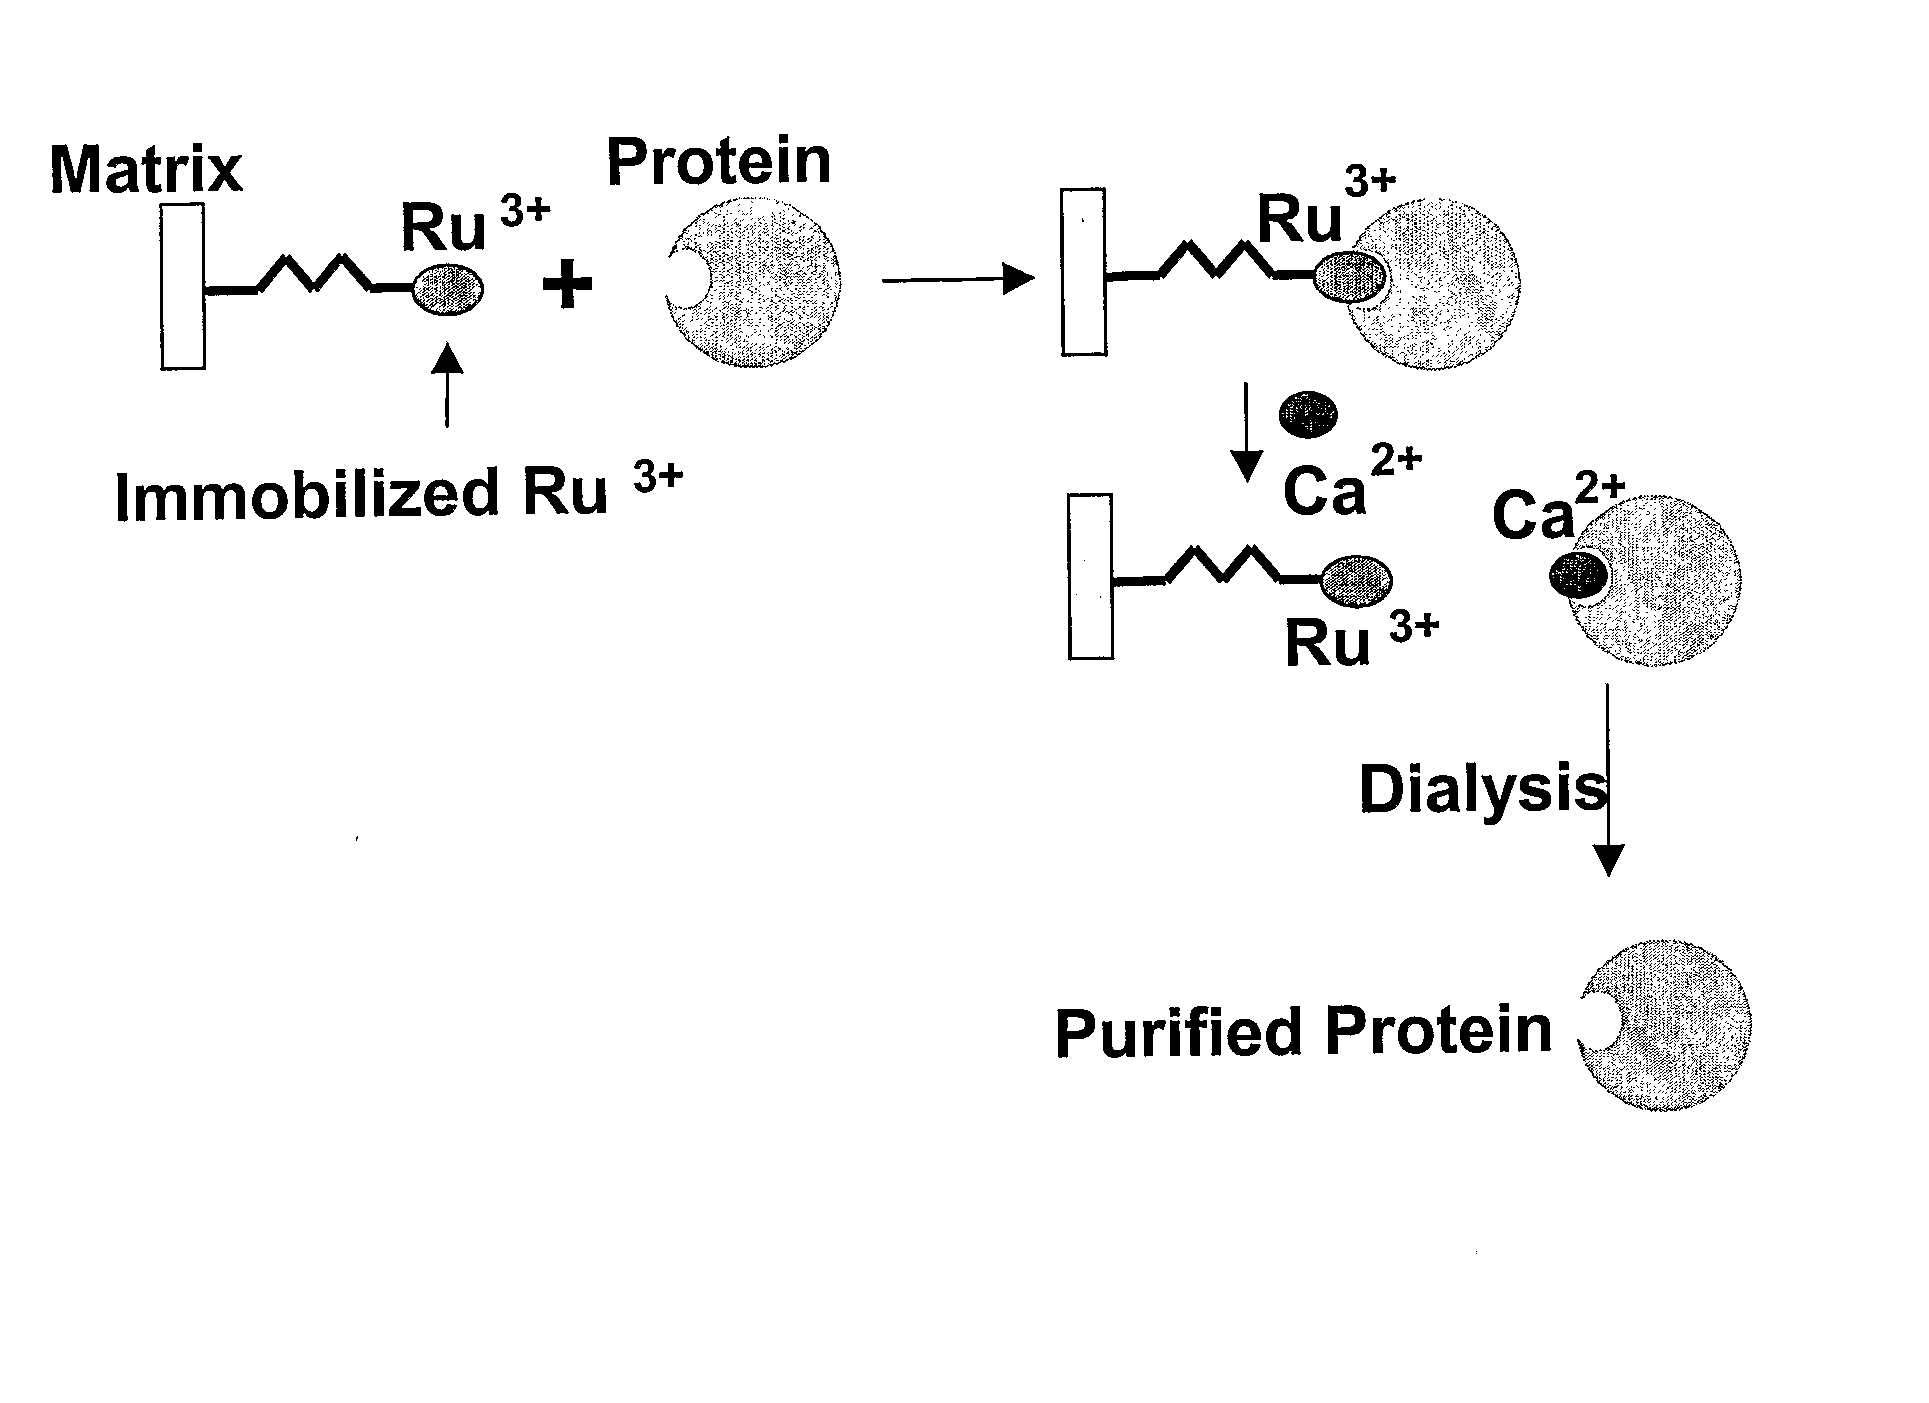 Photoreactive Compound Specifically Binding to Calcium Binding Proteins